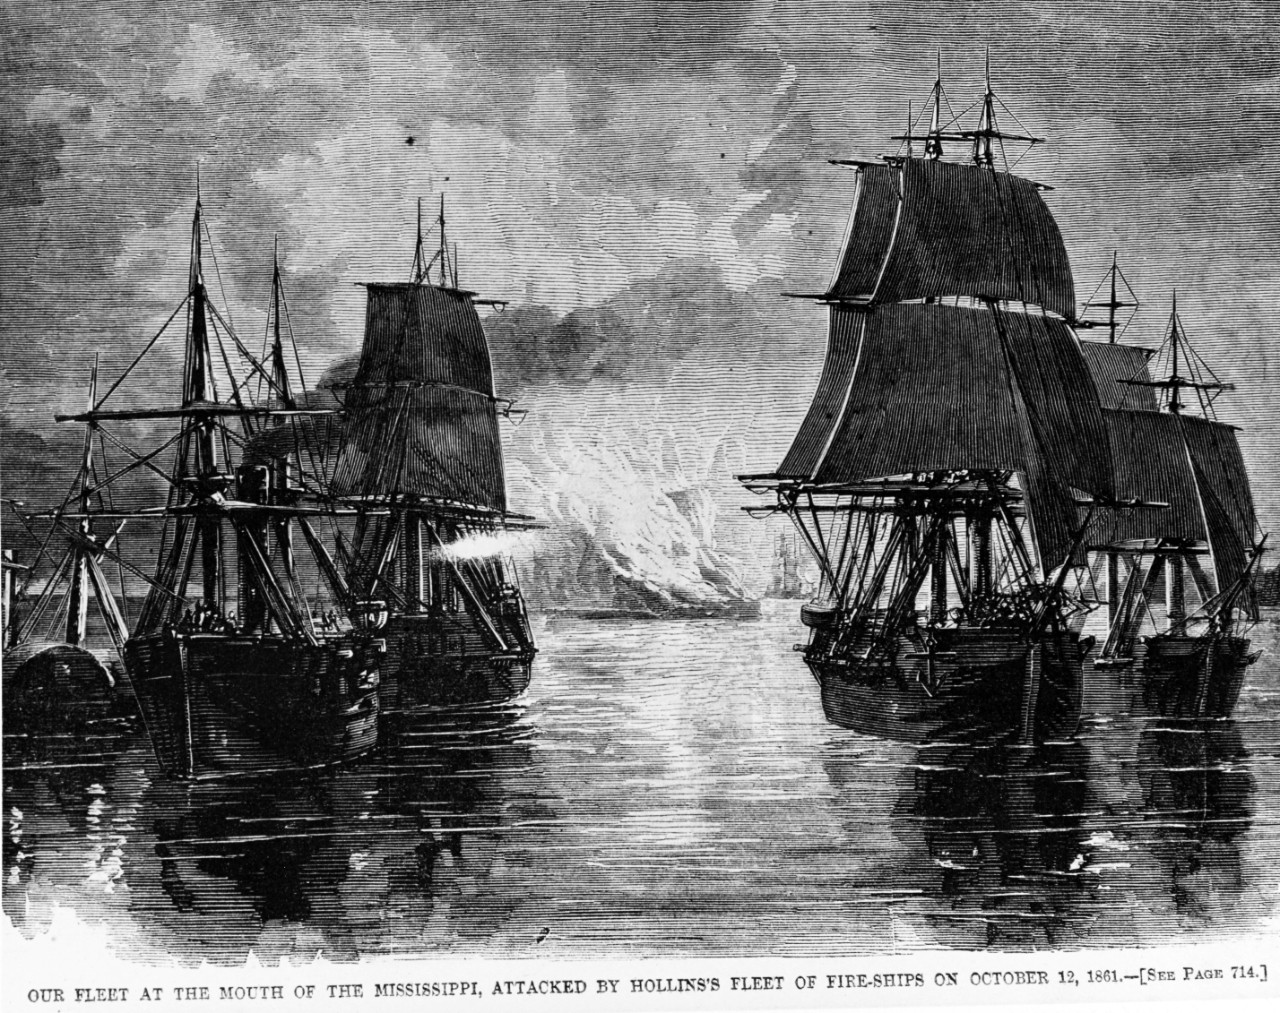 Union Fleet Under Attack by Hollins' Fleet of Fire-Ships at the Mouth of the Mississippi